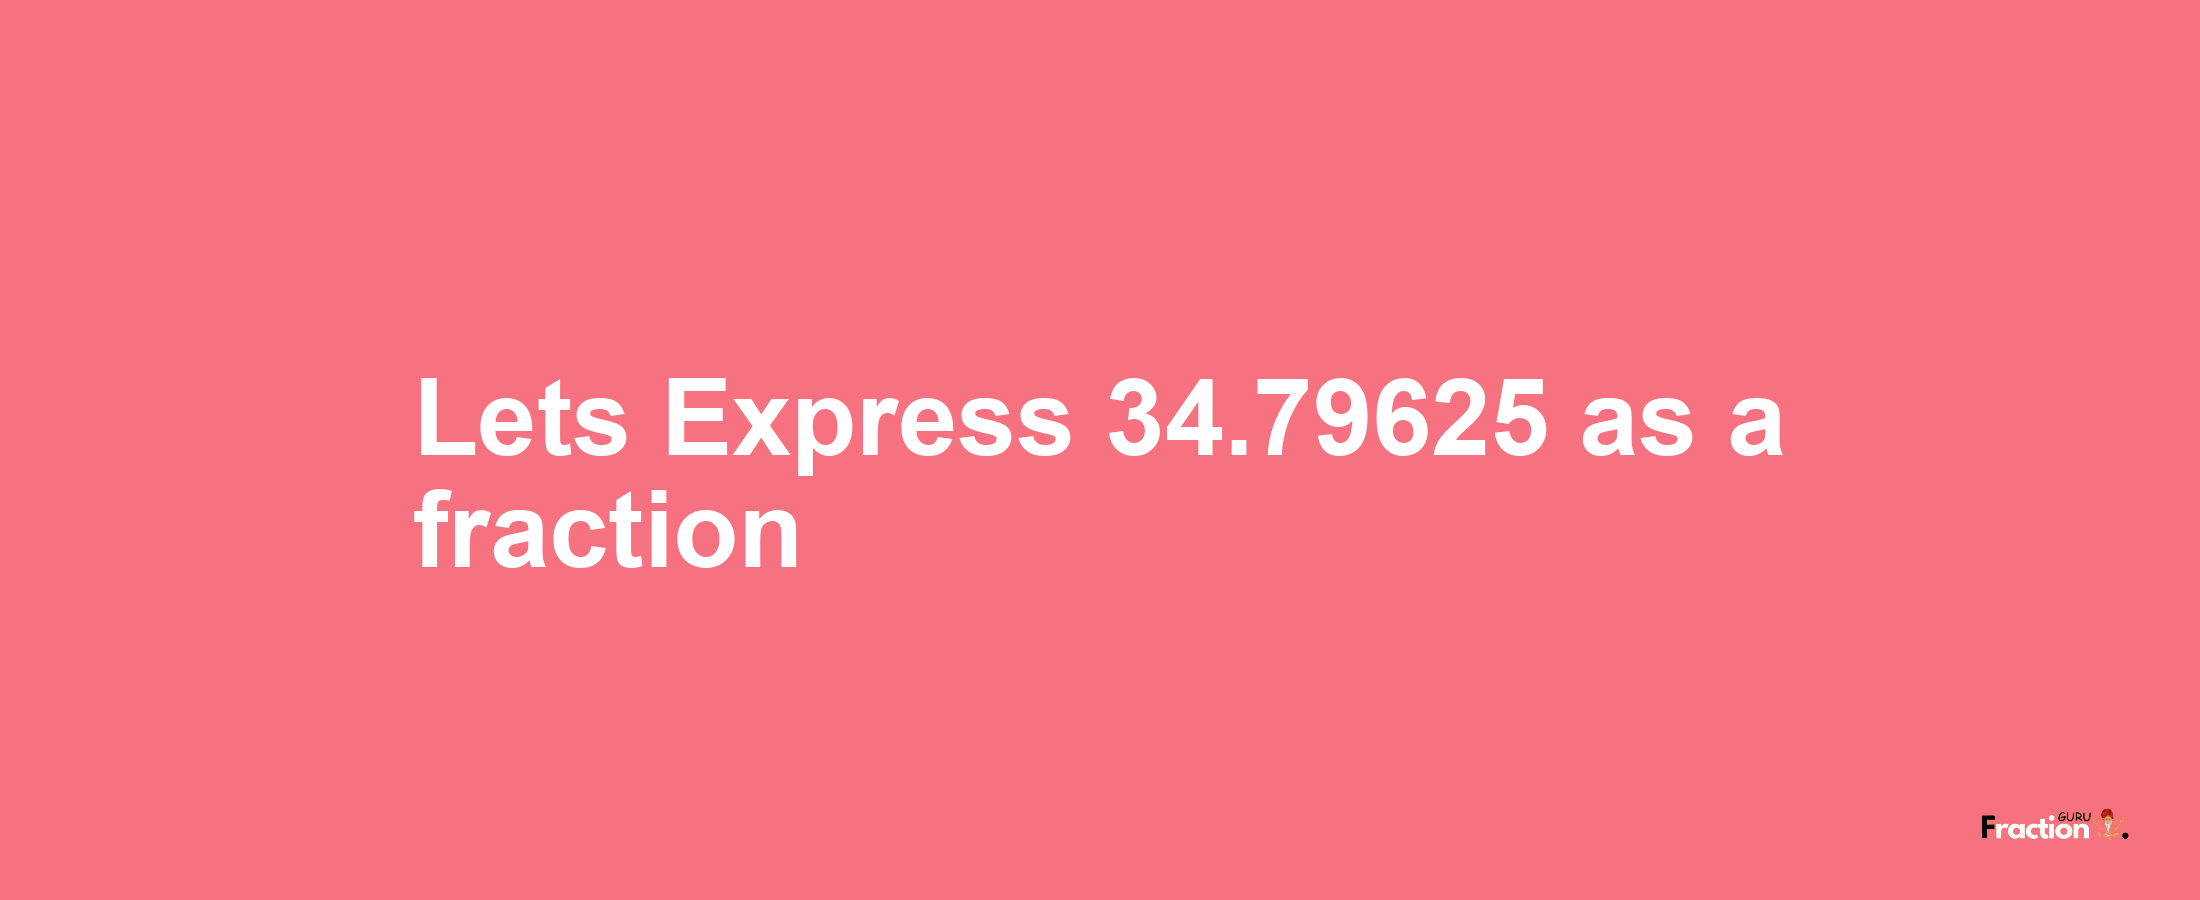 Lets Express 34.79625 as afraction